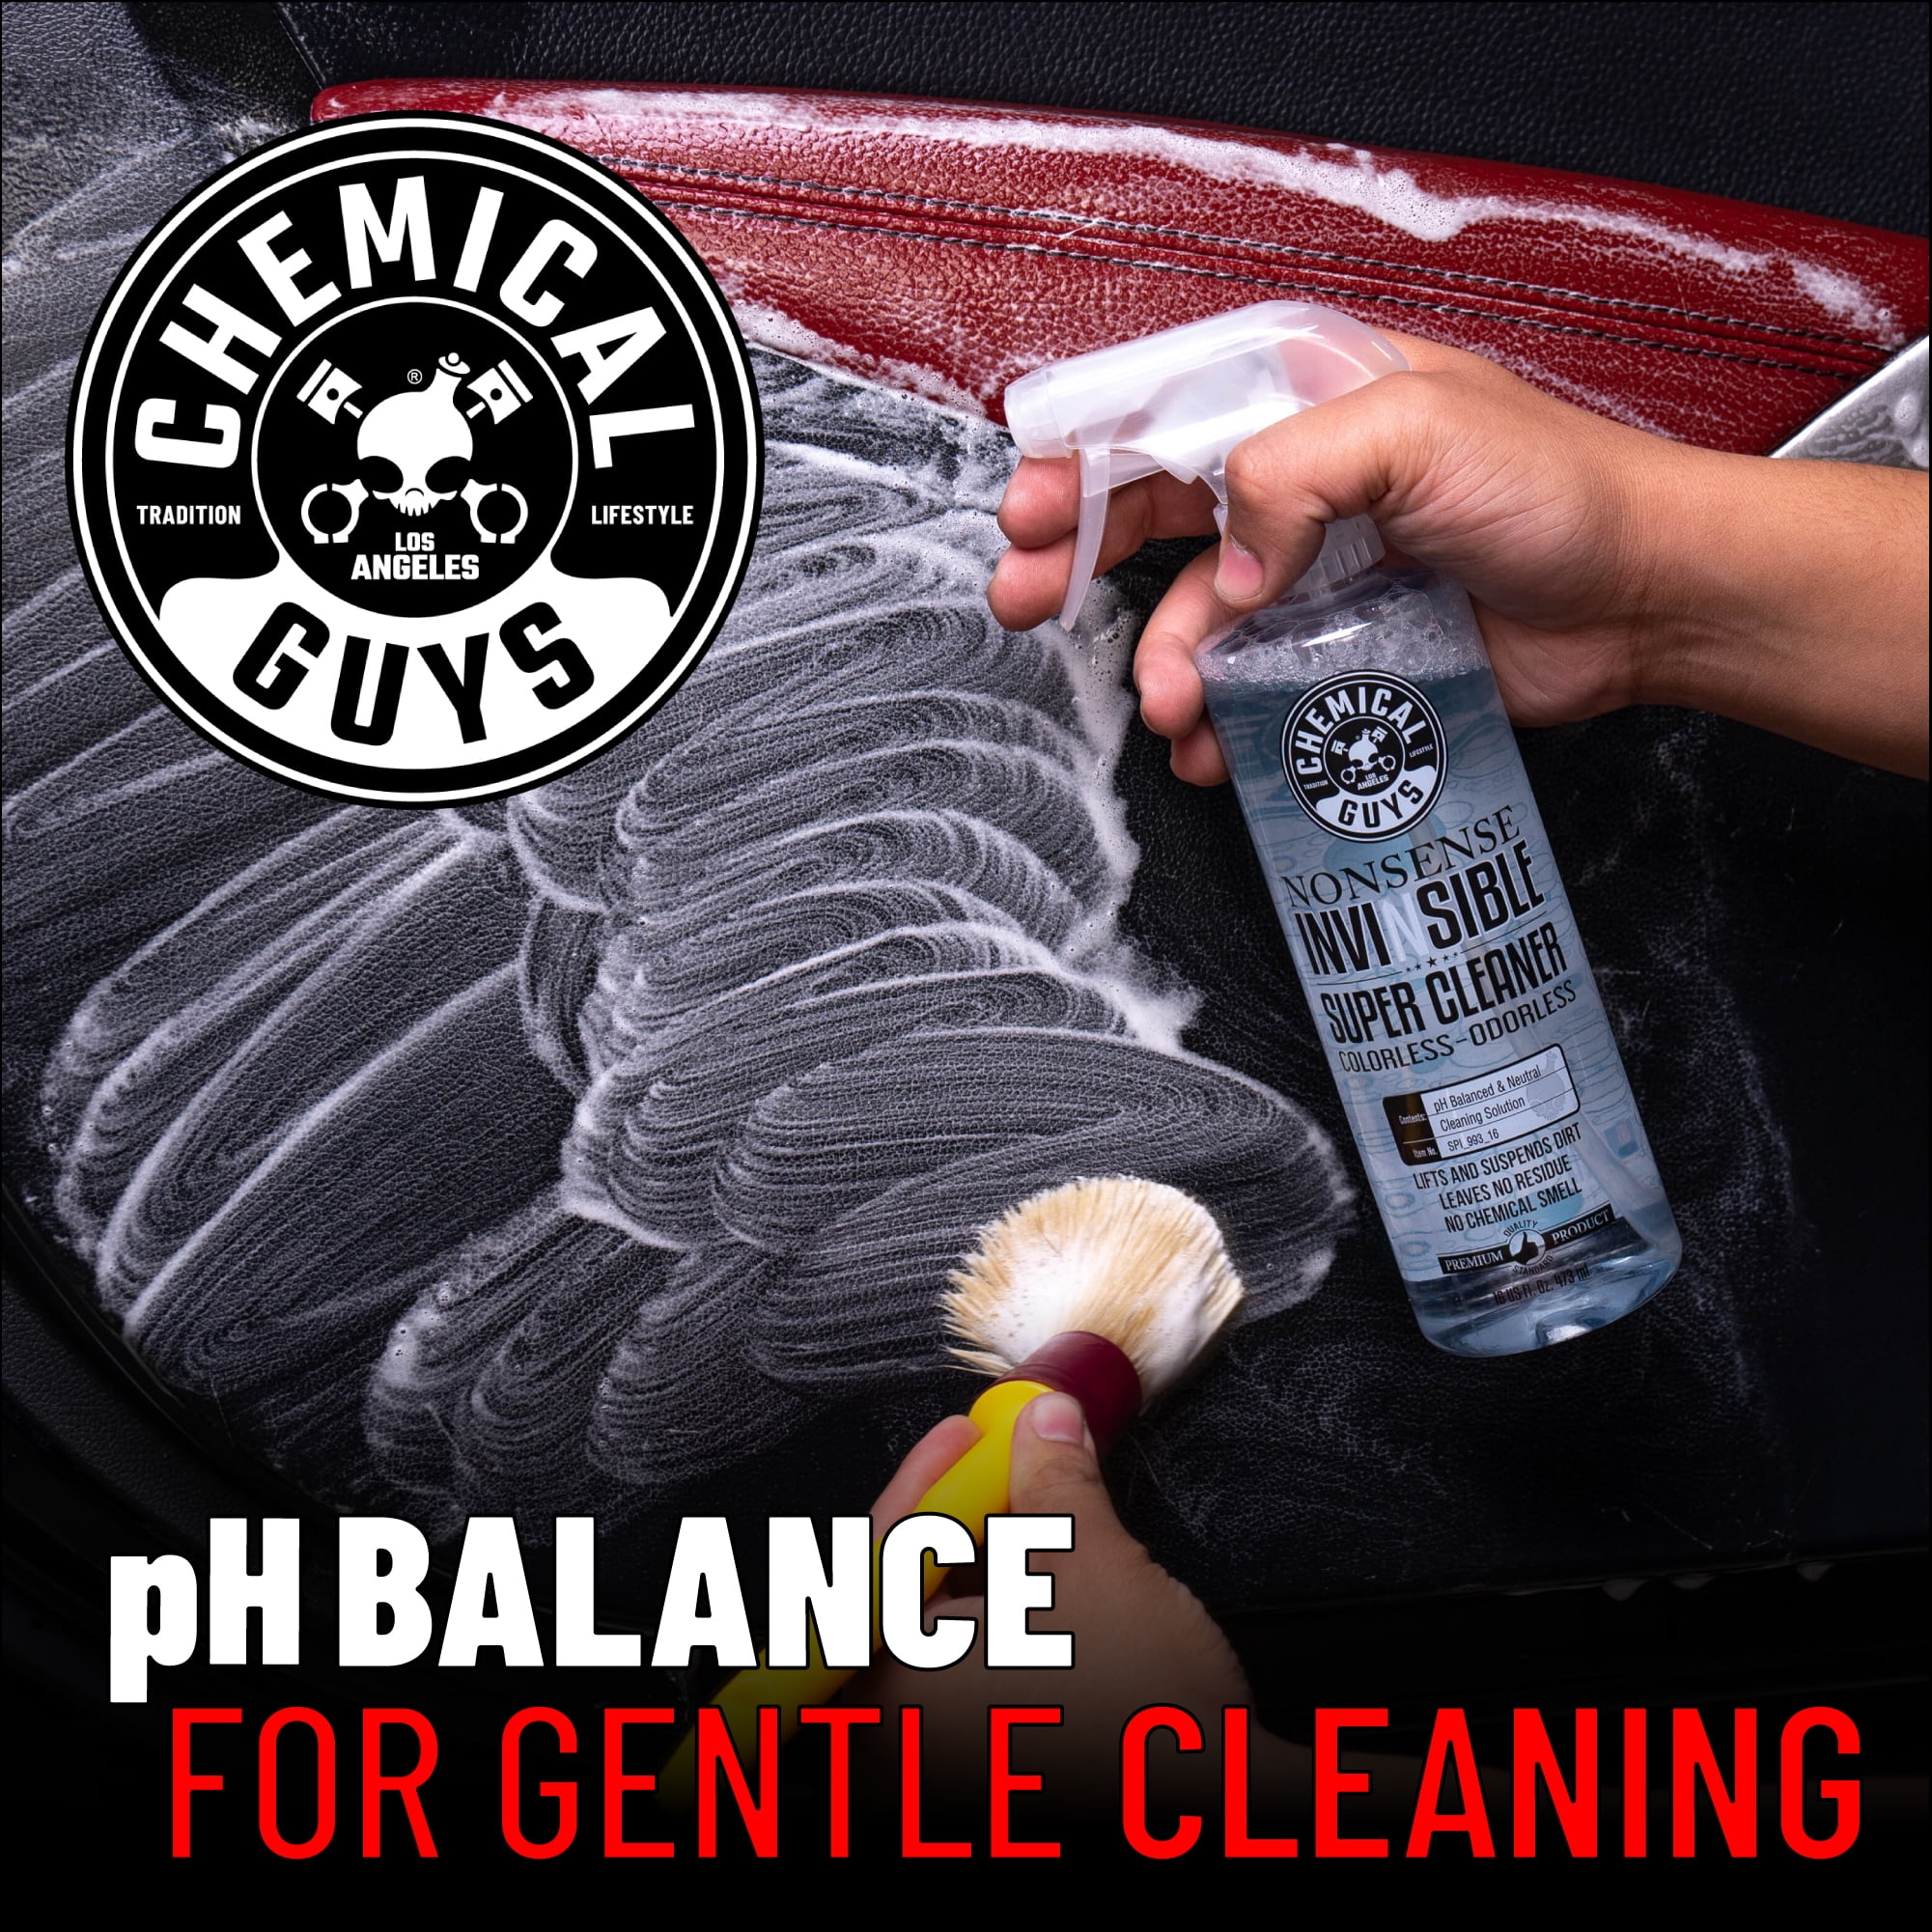 Chemical Guys SPI_993_16 Nonsense Colorless & Odorless All Surface Cleaner  16 oz